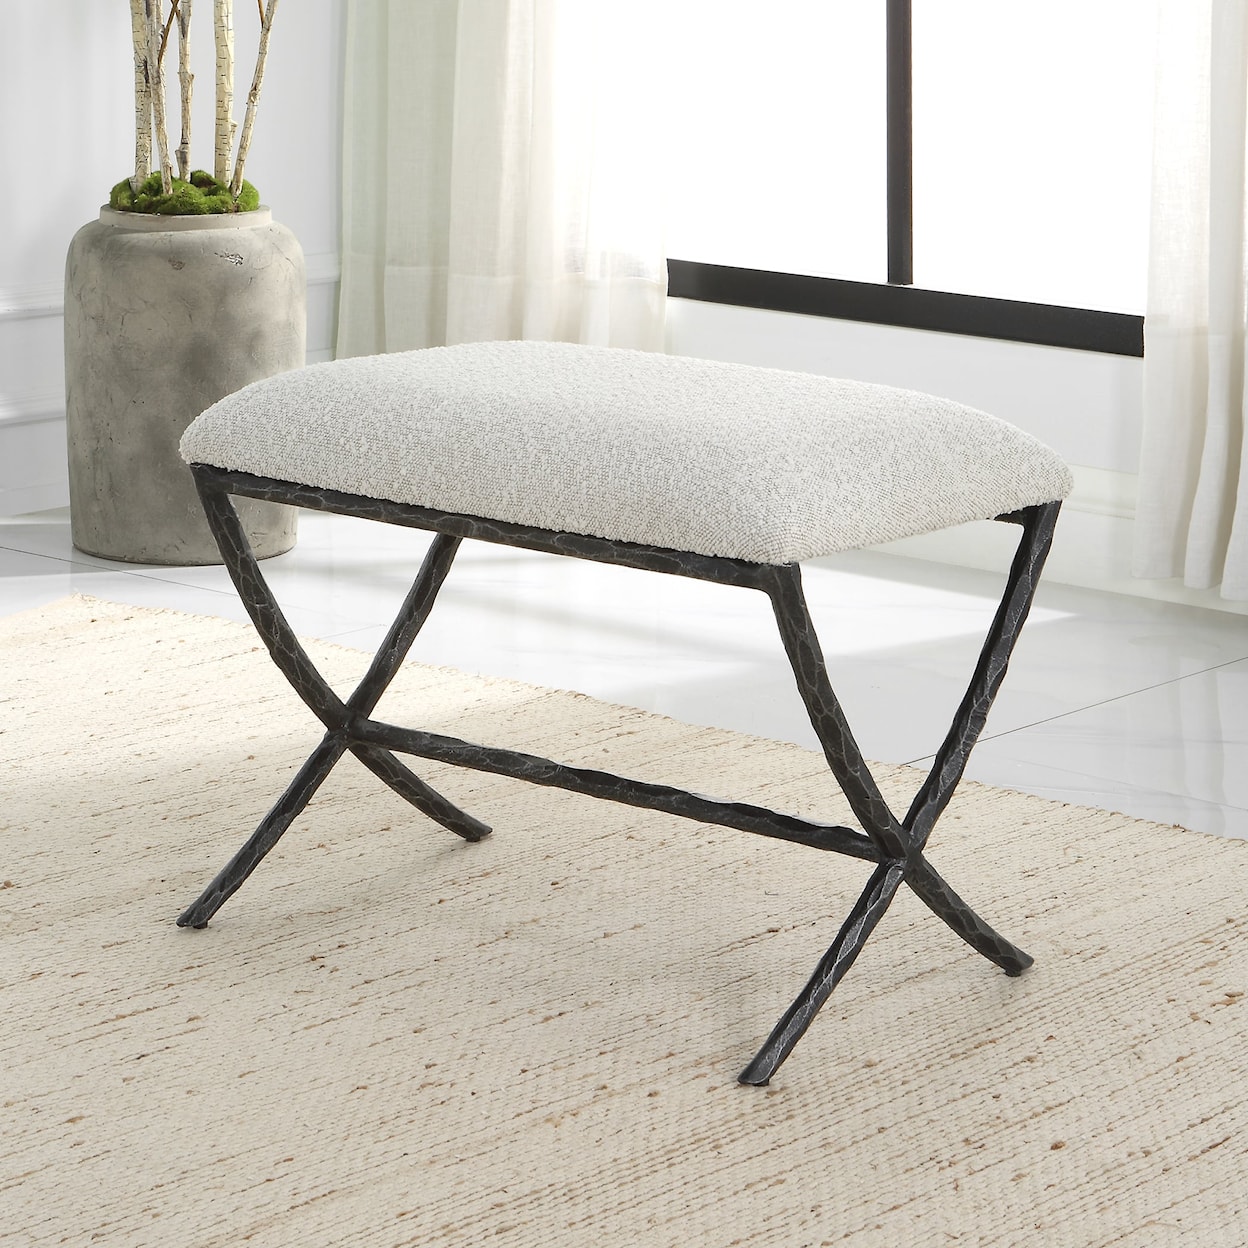 Uttermost Brisby Gray Fabric Bench with Iron Base